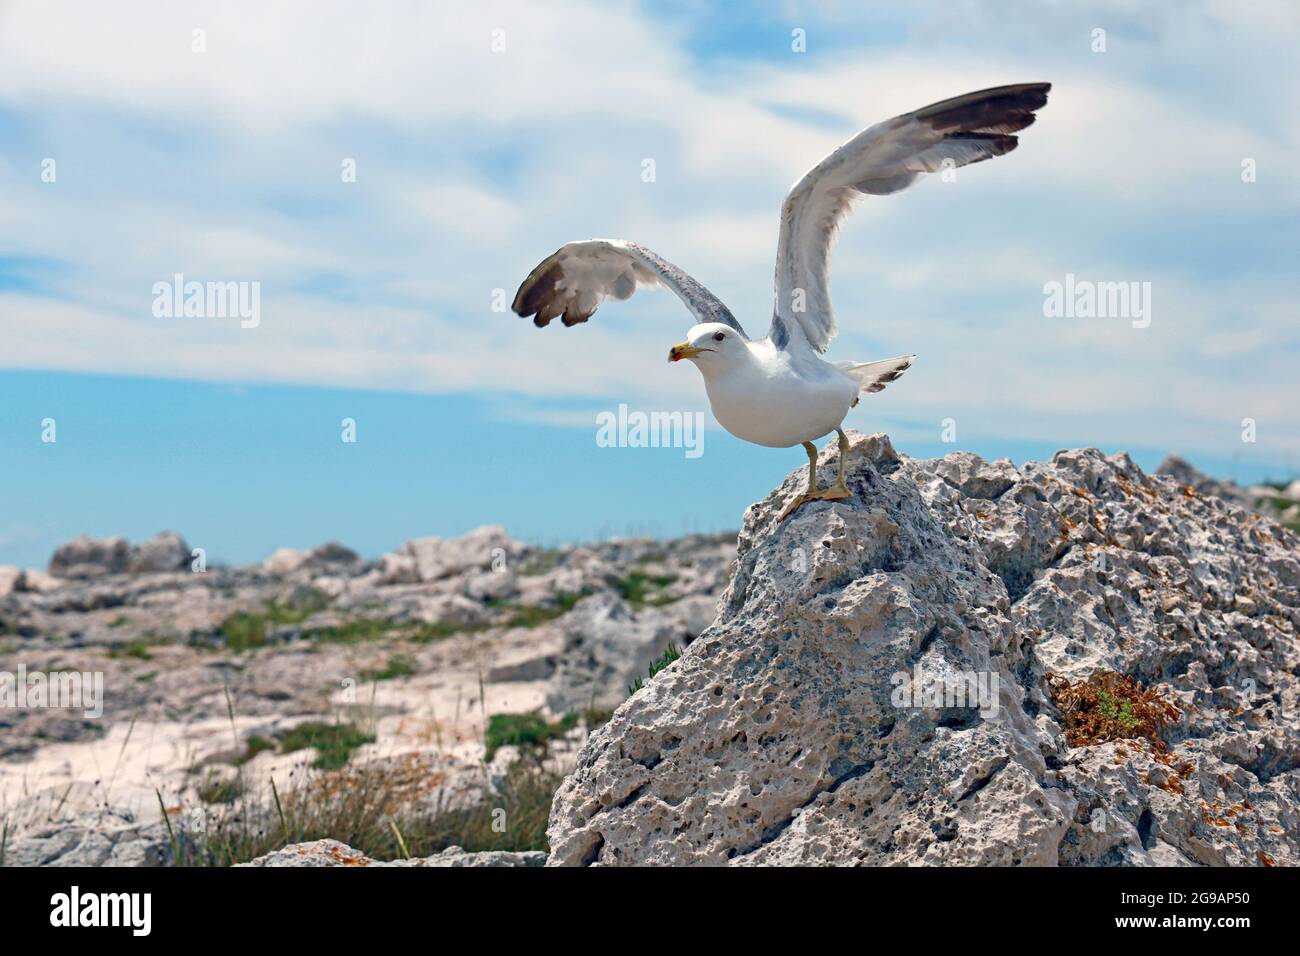 seagull with spreaded wings takes off on a stone coast in mediterrean Stock Photo